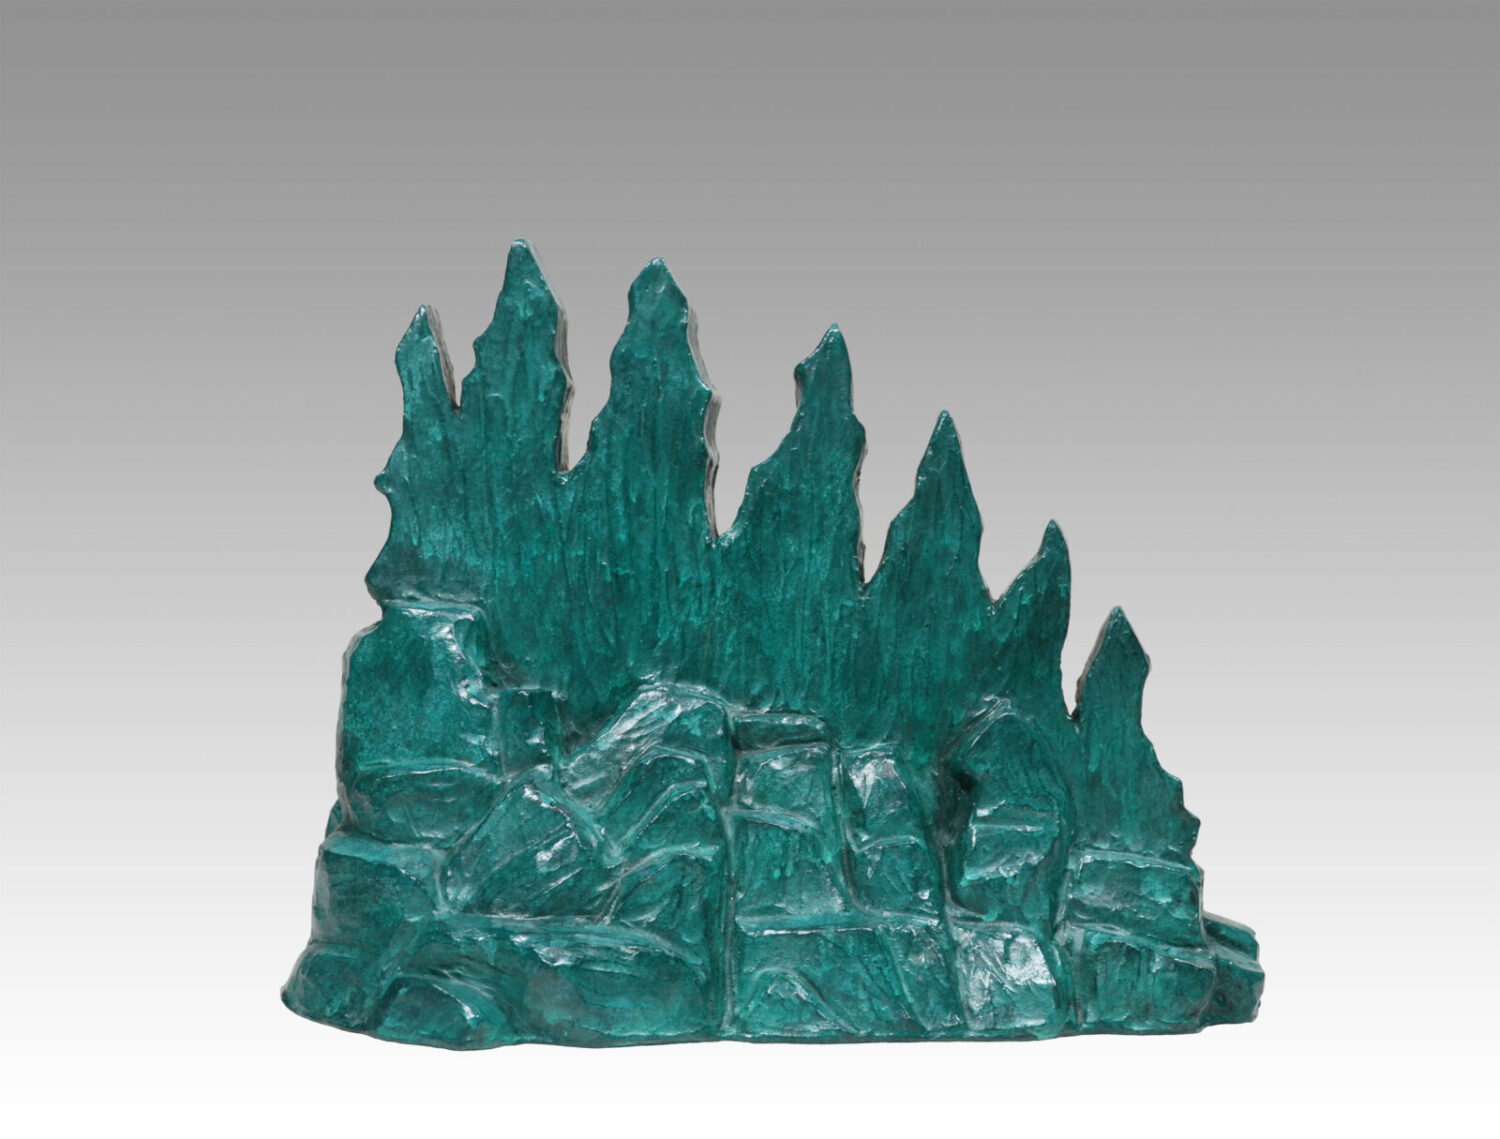 Gallery, Ancient Lights, $325 CAD, Metal Infused, 10 ½” L, Edition 60, Specialty Finish, Land and Folk Sculpture of an Old-Growth Forest, Sculptor Tyler Fauvelle